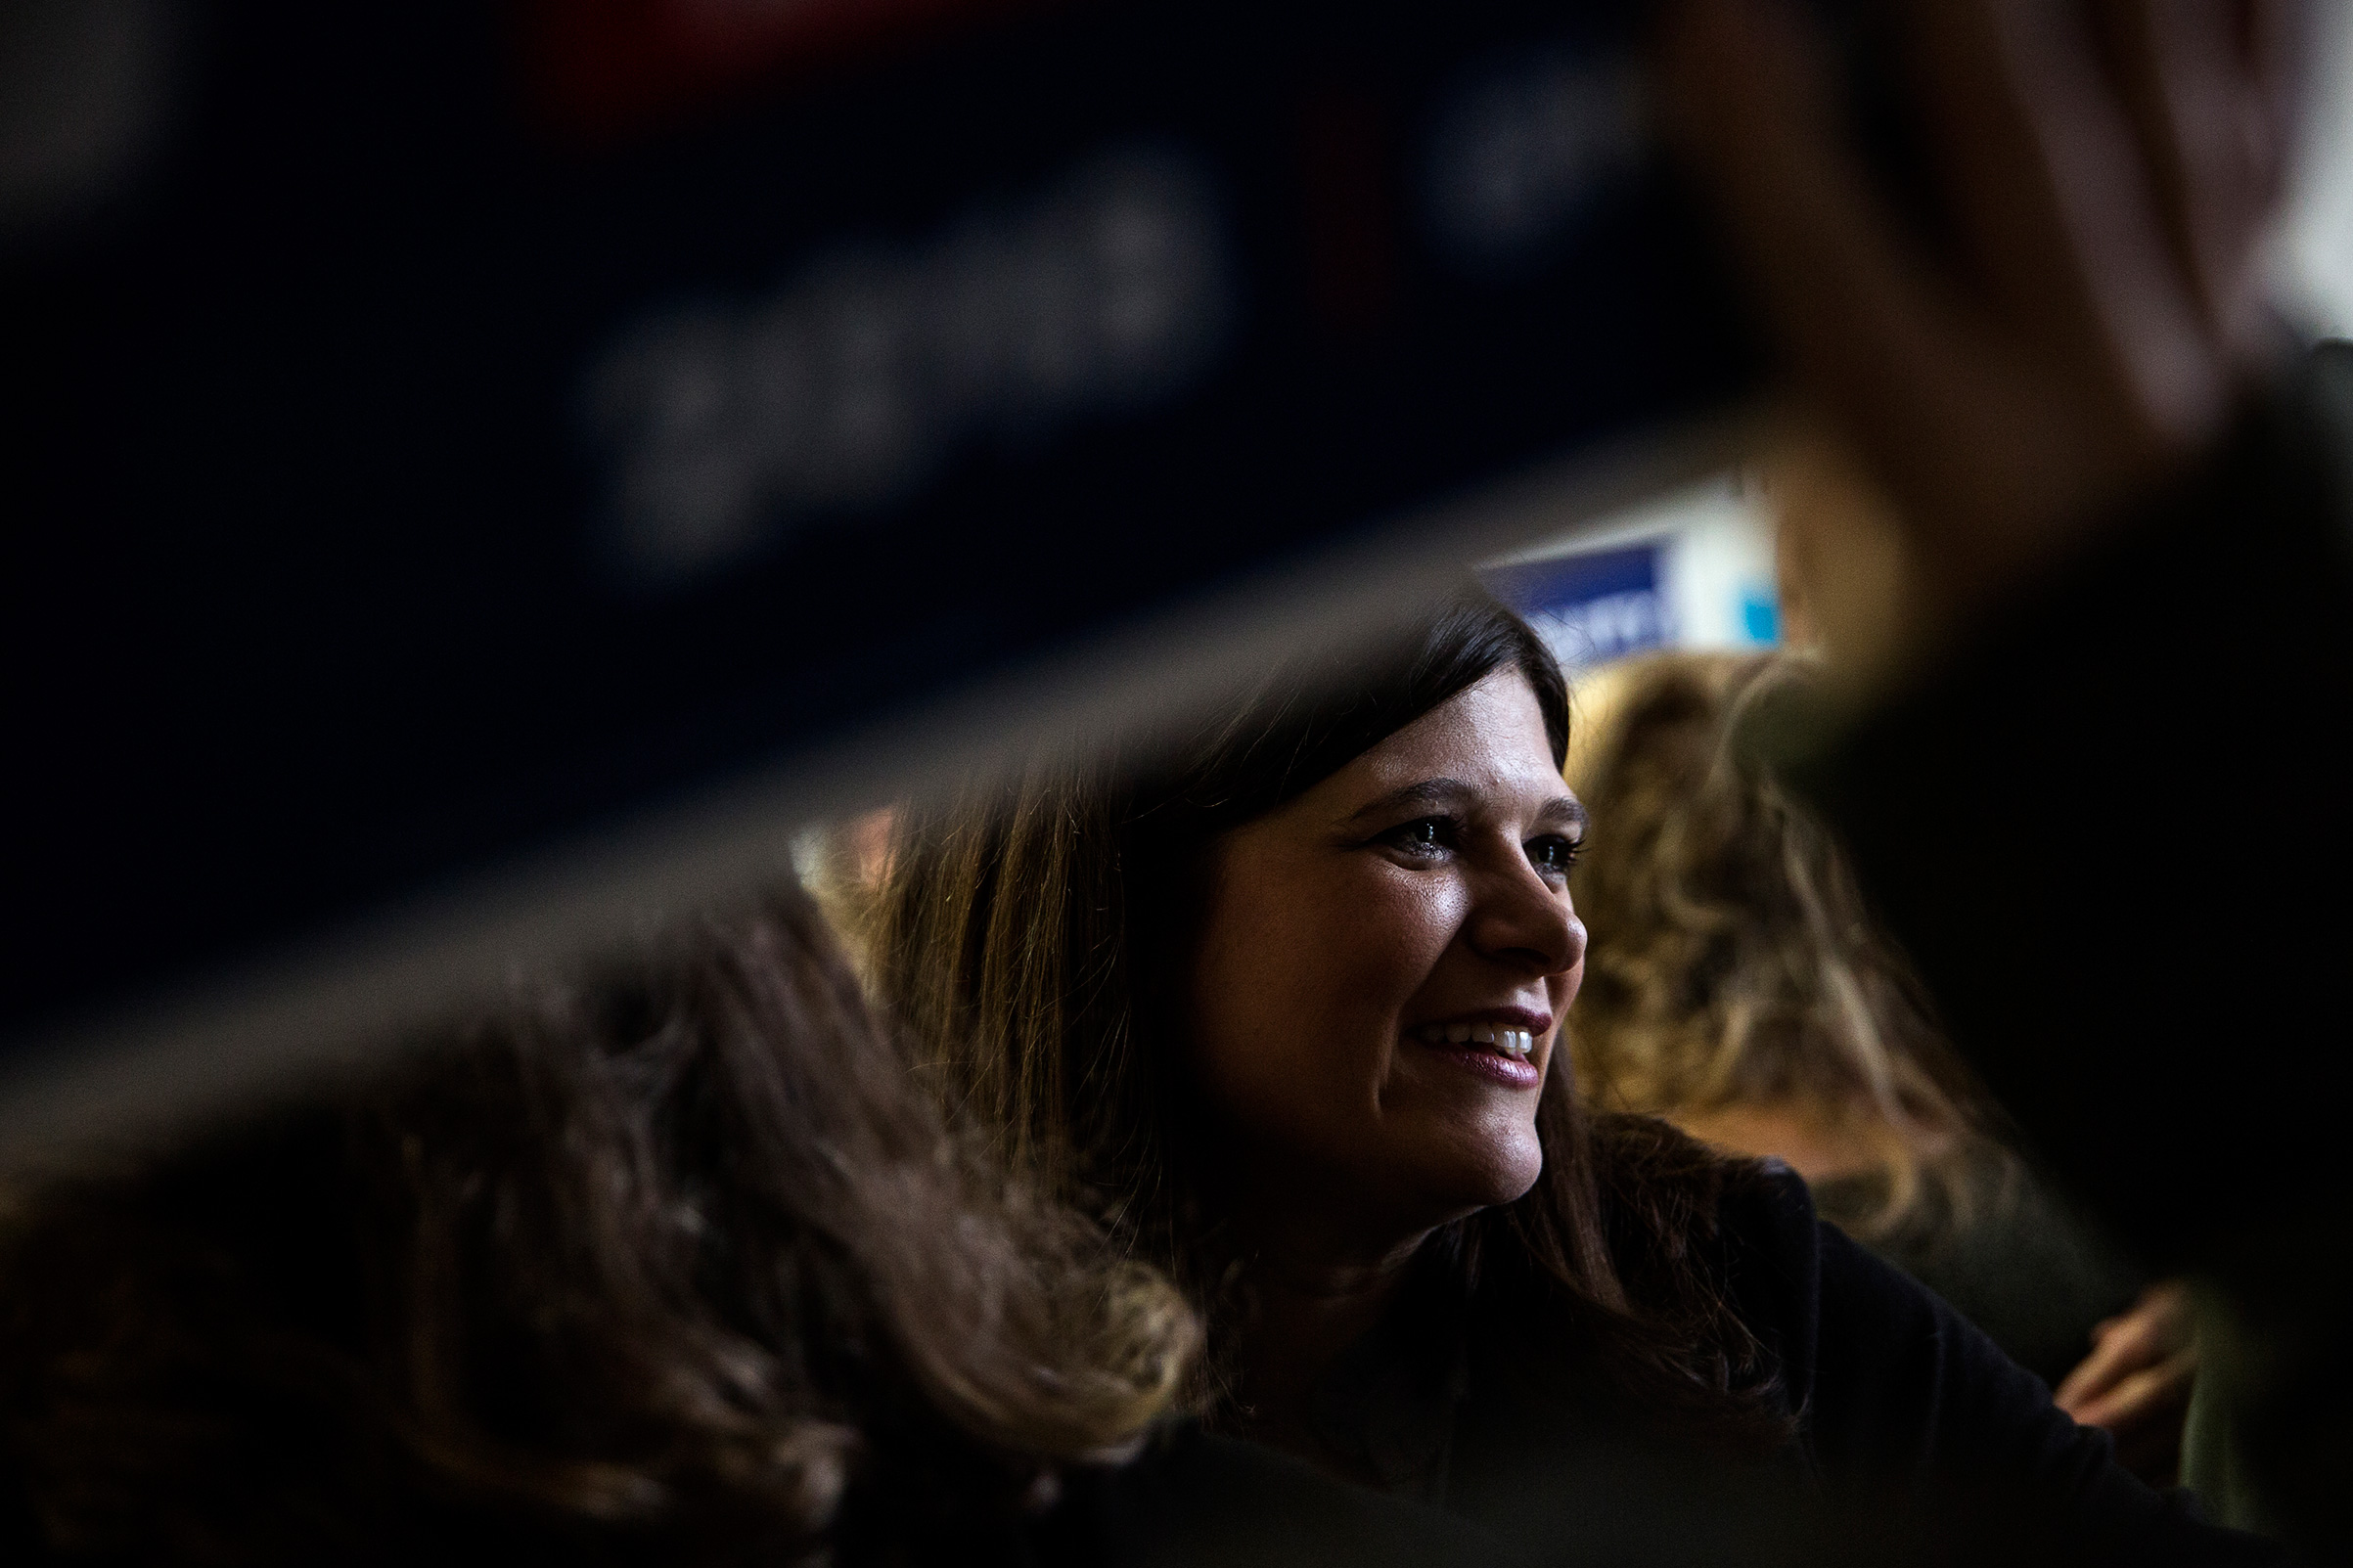 Democratic candidate for Michigan's 11th Congressional District Haley Stevens talks to supporters and volunteers while launching election day canvassing at her Field Office in Troy, Mich, on Nov. 6, 2018. (Erin Kirkland for TIME)